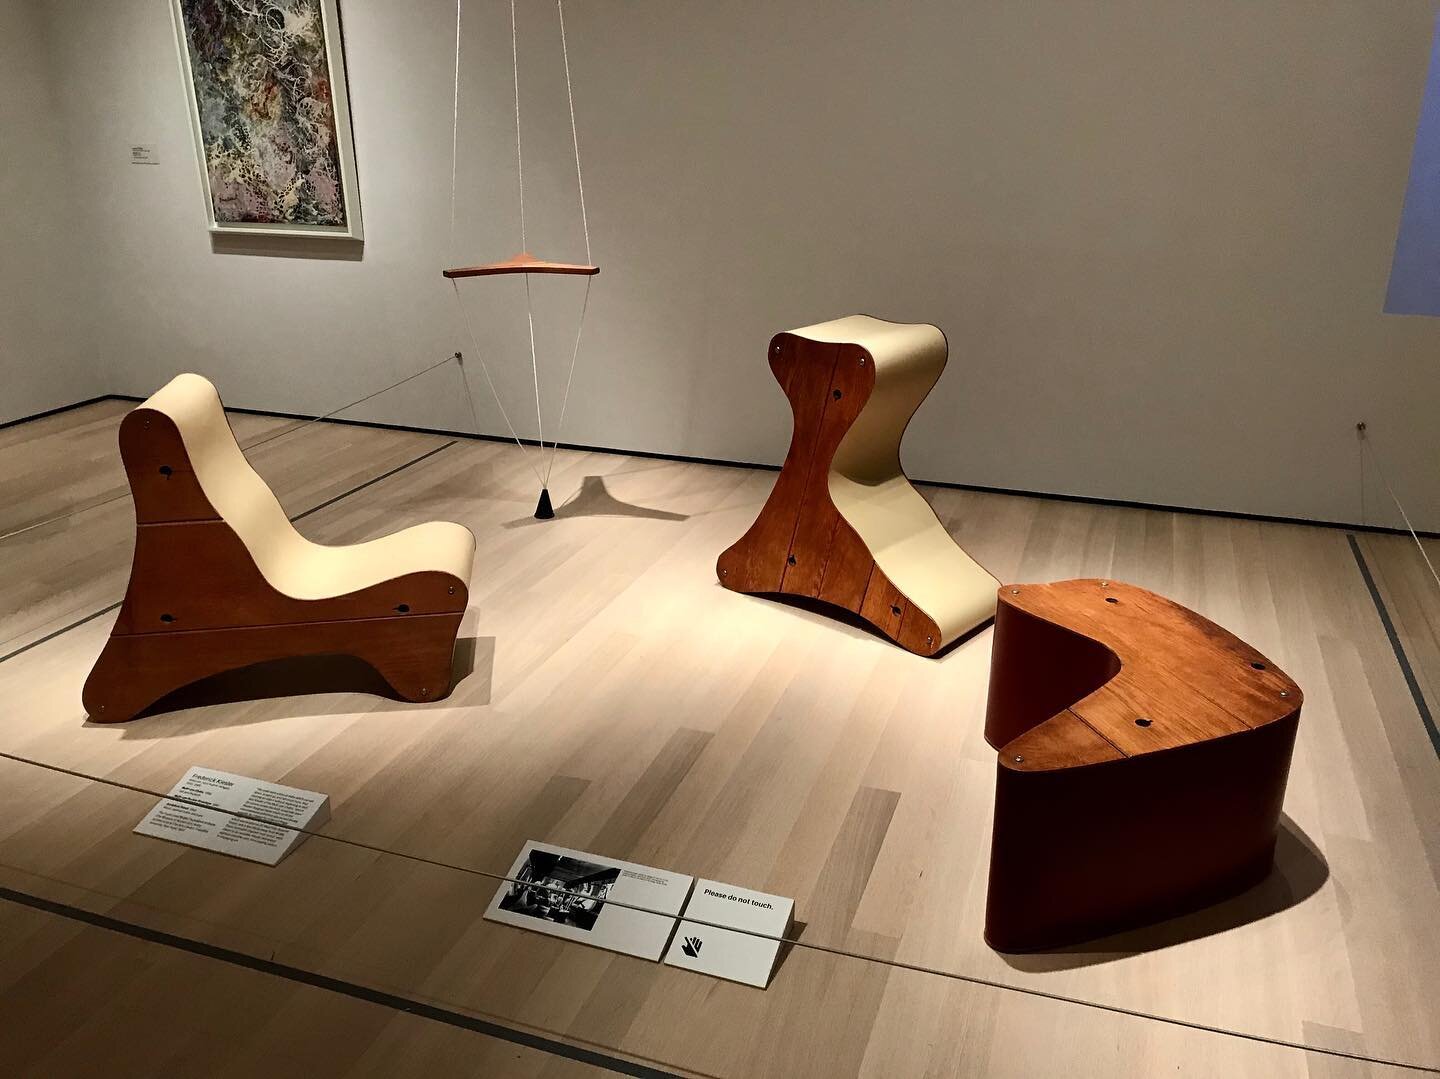 Multi-use Chairs by Frederick Kiesler at the MOMA